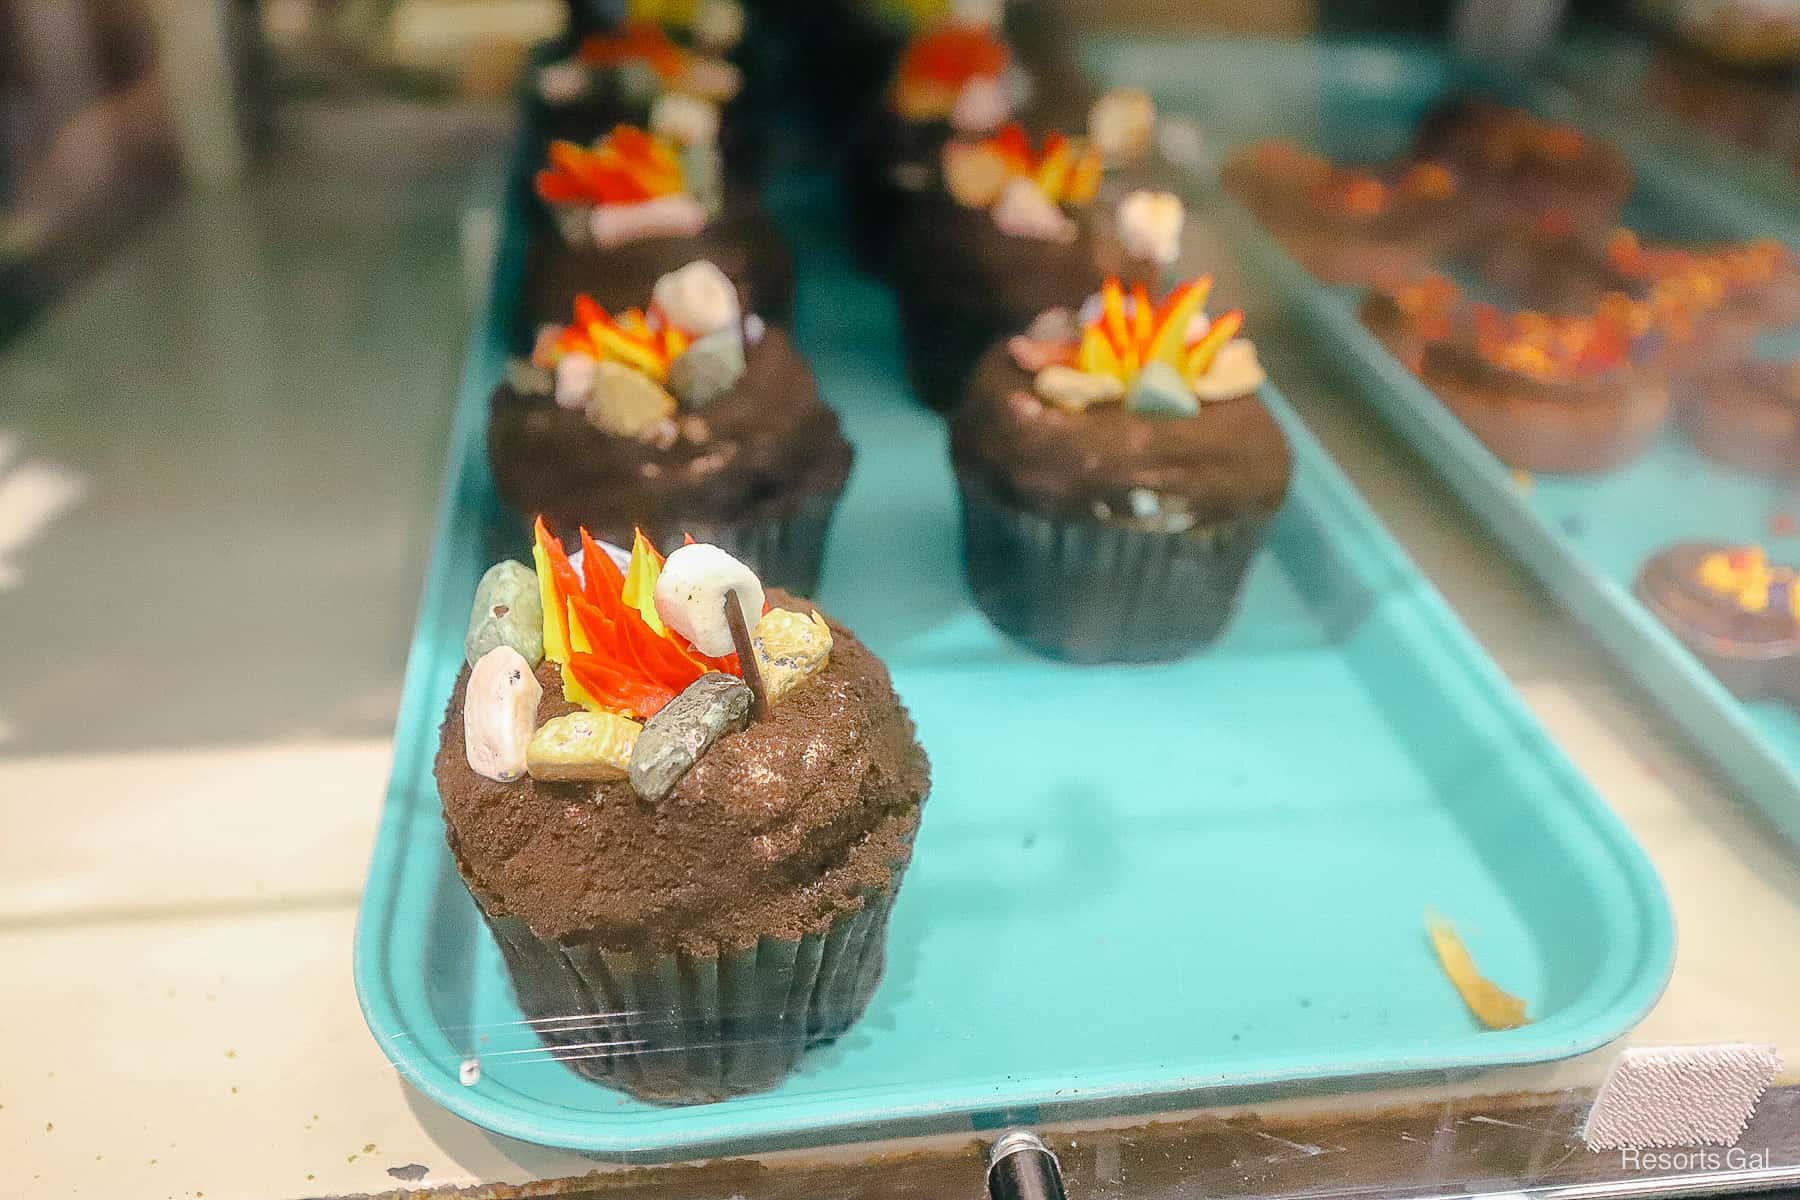 the Campfire S'more cupcake is chocolate and looks like a marshmallow is roasting over the fire on top of it 